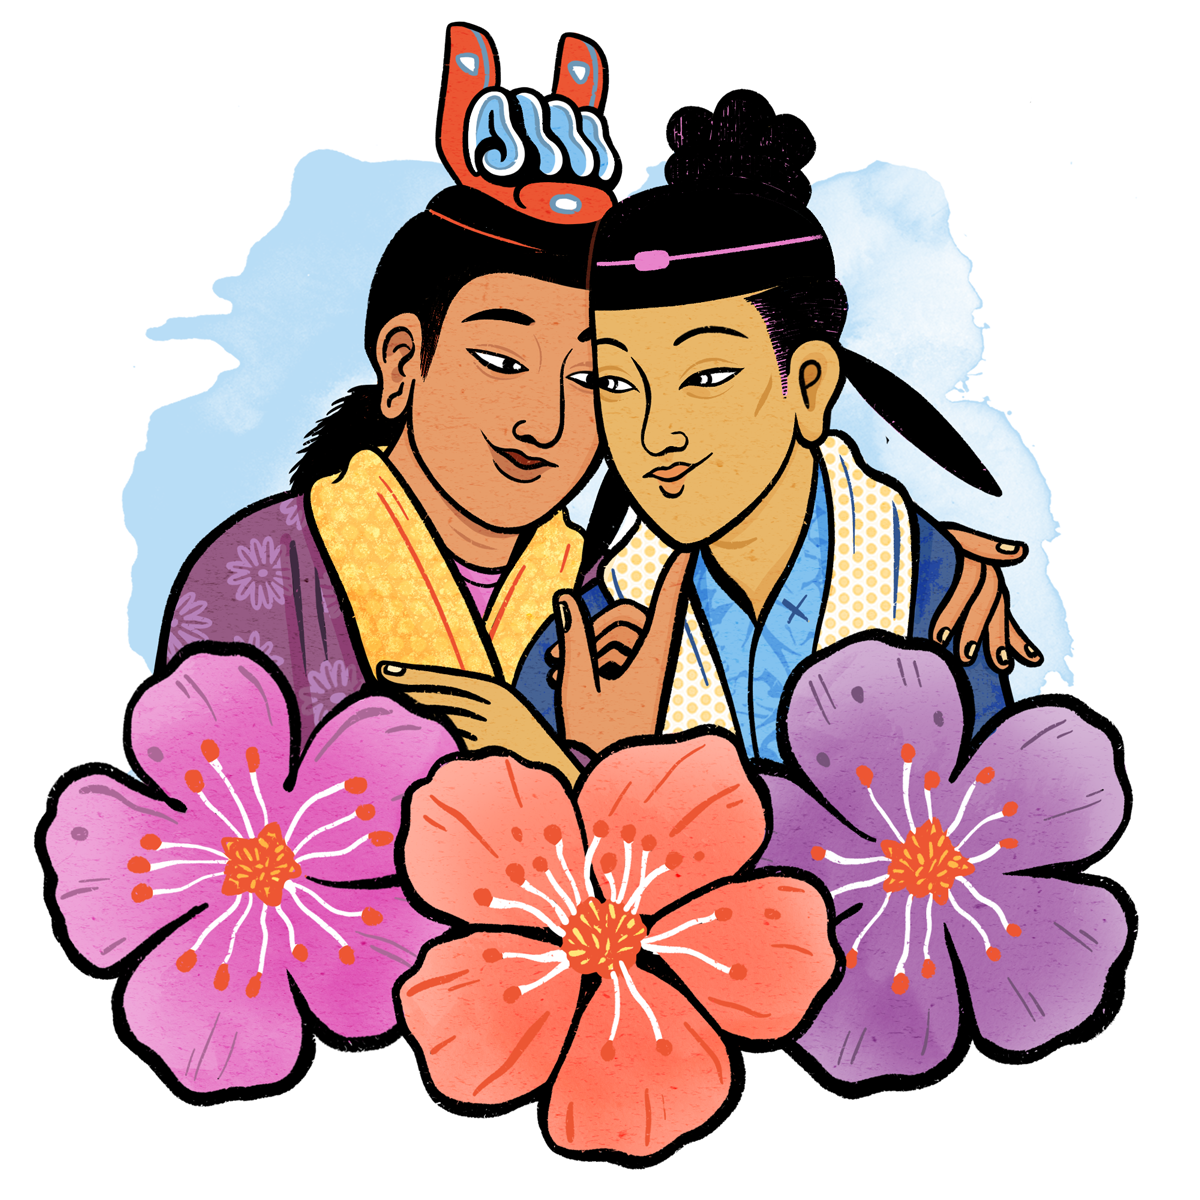 Two queer Chinese men in historic clothing embracing, surrounded by flowers